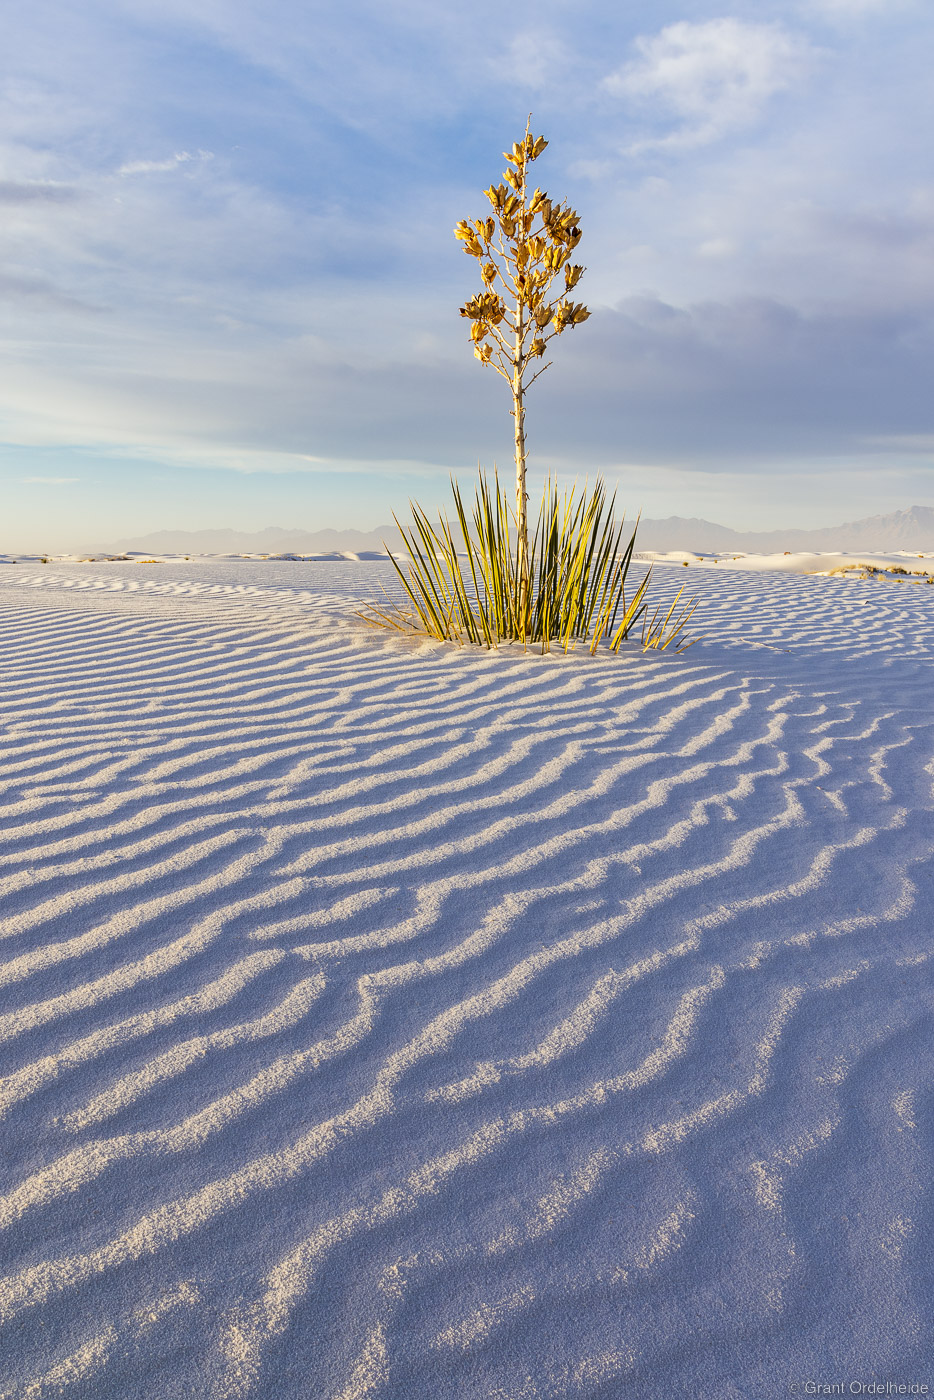 Early morning light across the dunes in New Mexico's White Sands National Park.